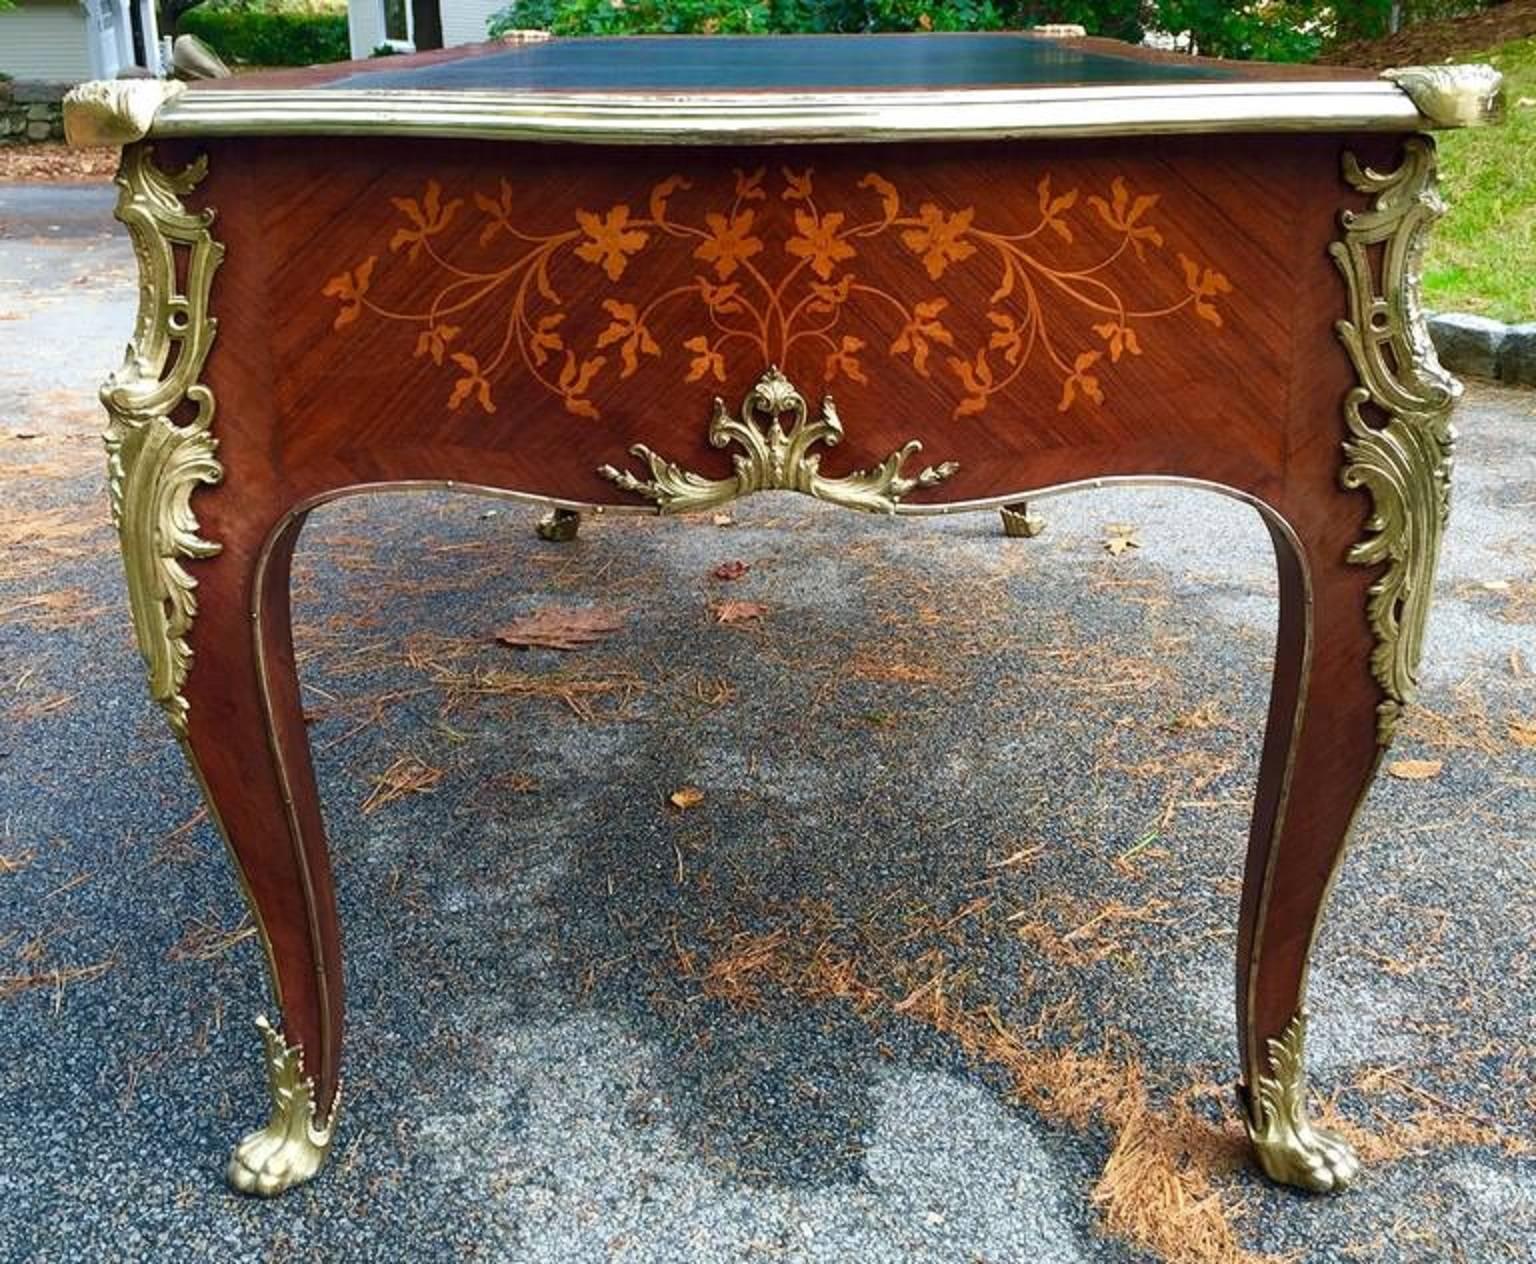 This kingwood Louis XV style bureau plat/writing desk has finely executed tulipwood marquetry of flowers and leaves. 
The ormolu mounts are all original and so is the almost black and green leather top. Constructed with highest quality, the